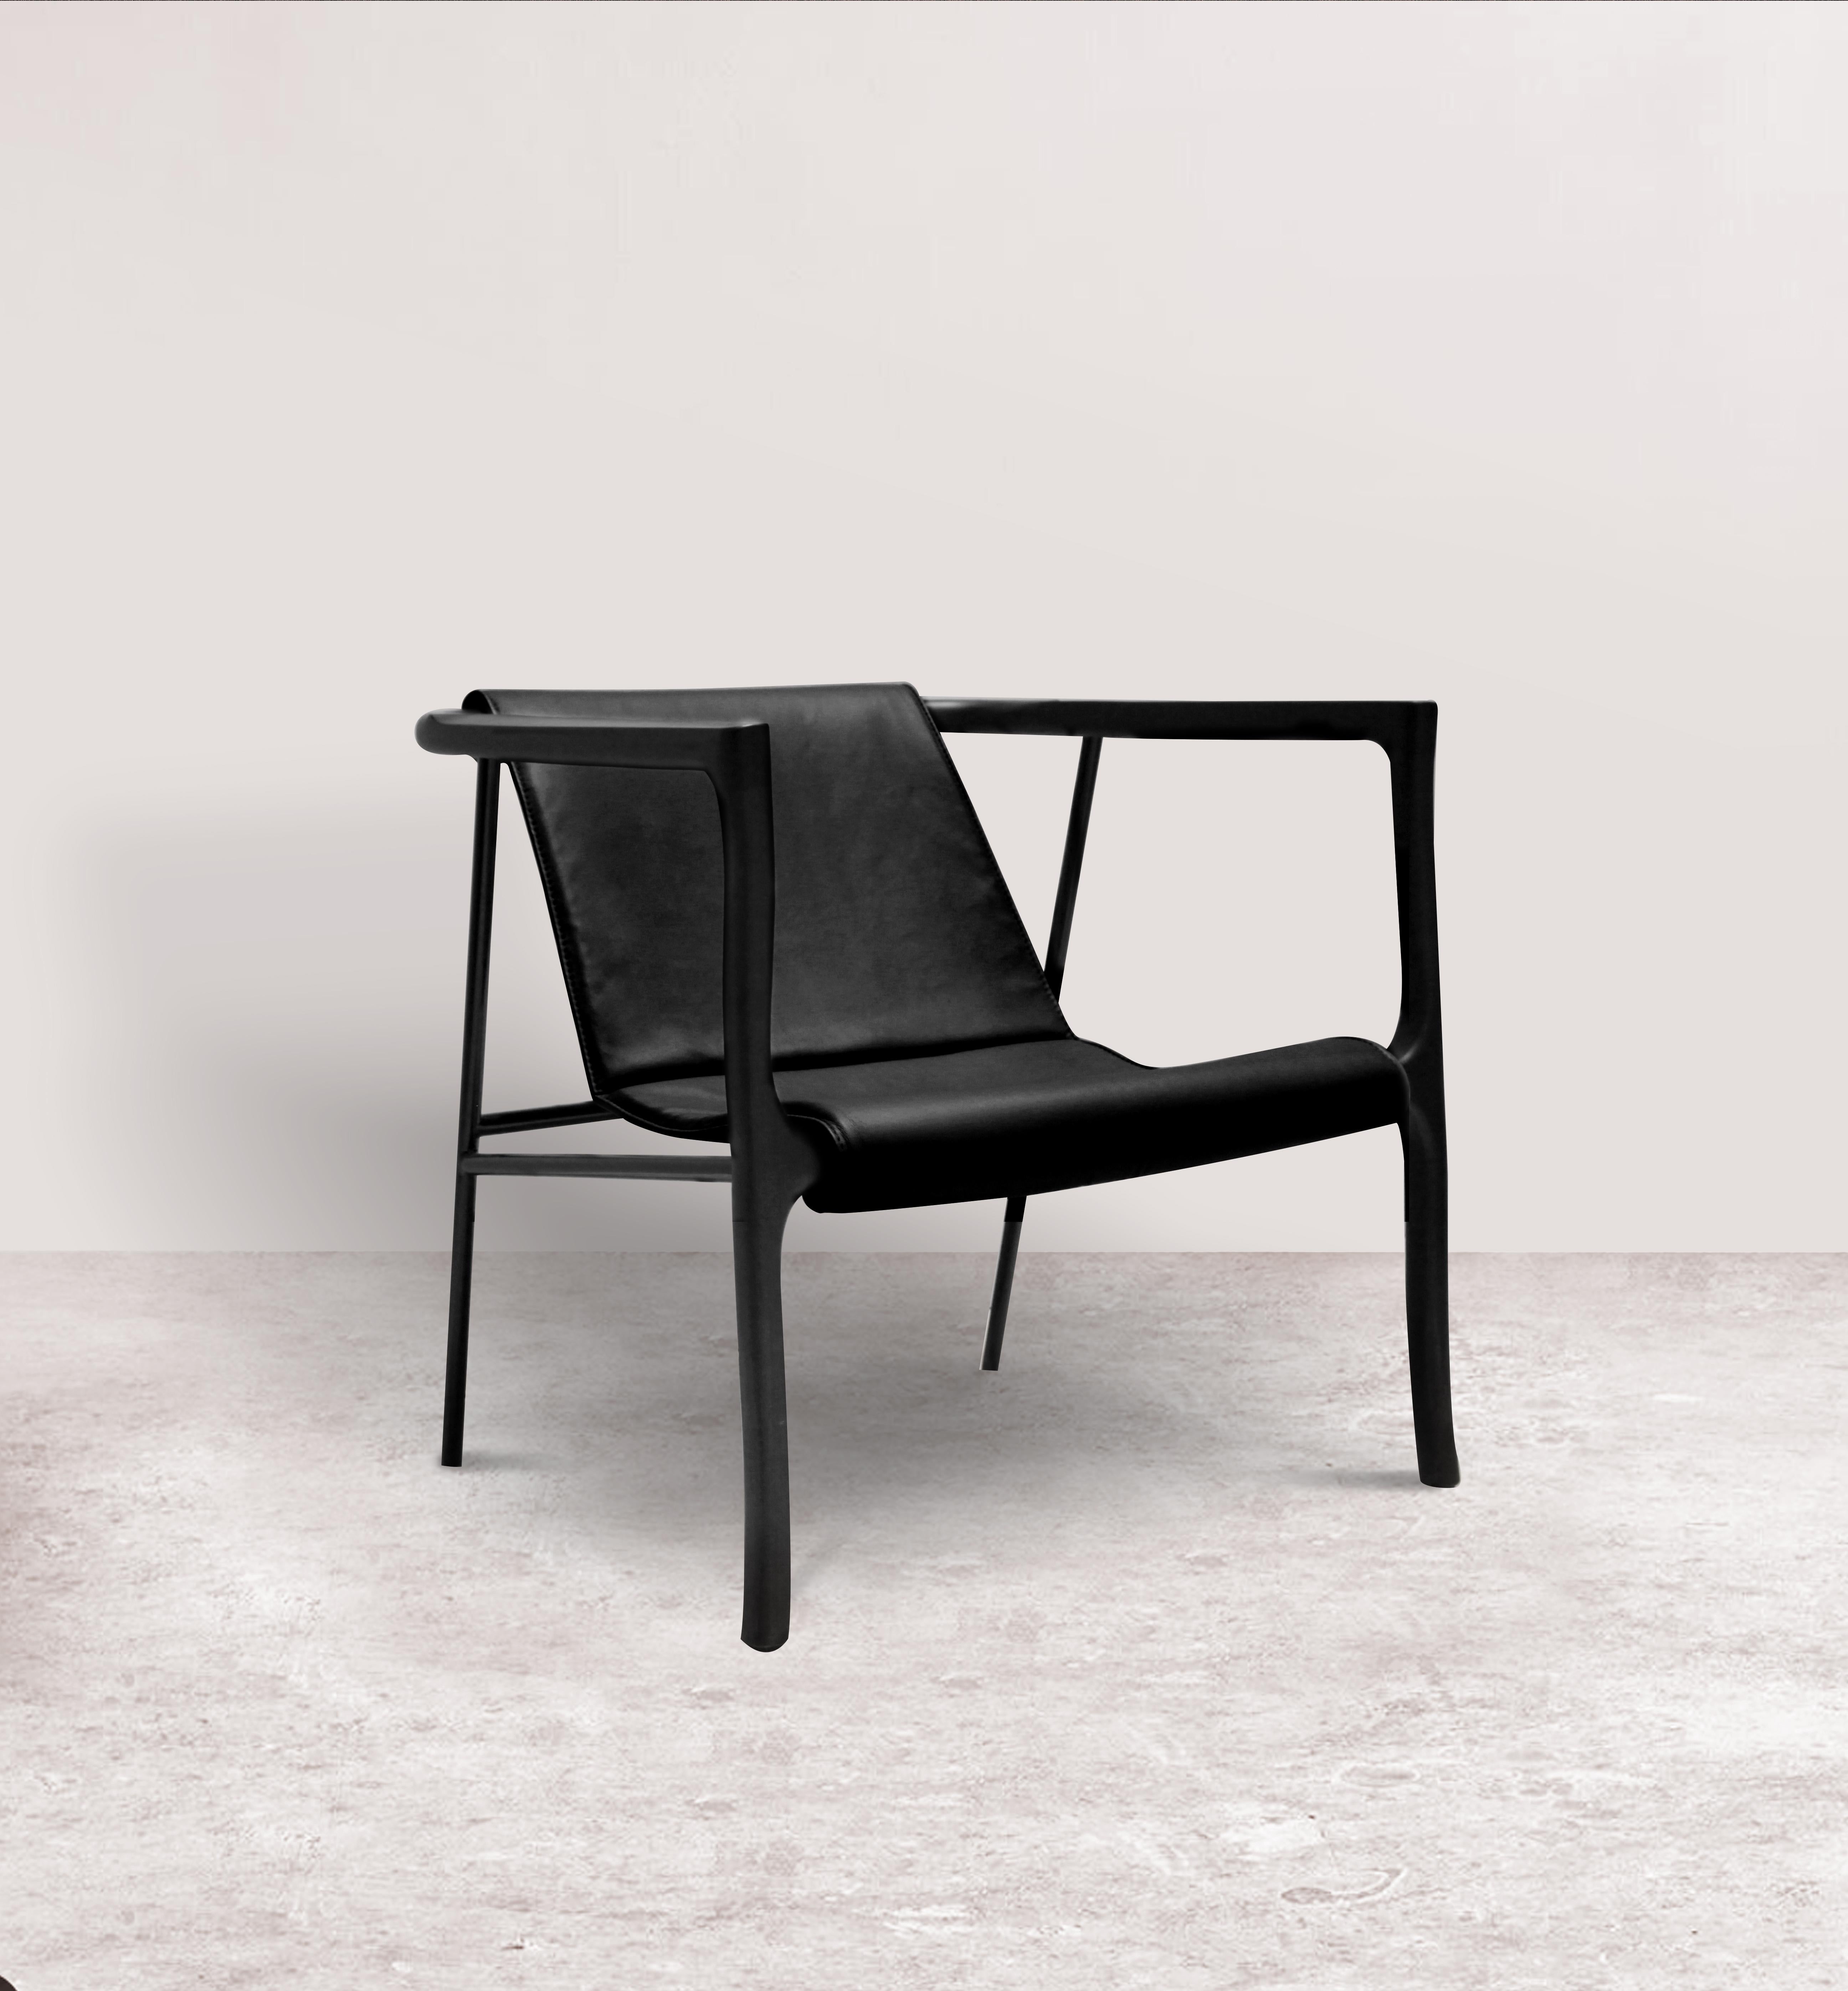 Black Elliot armchair by Collector
Materials: Solid oak wood armrests.
Black Lacquerd metal frame structure. Uphostered in leather.
Dimensions: W 85 x D 75 x H 72 cm, SH 44 cm 
Depending on the material the price may vary.

With solid and curved